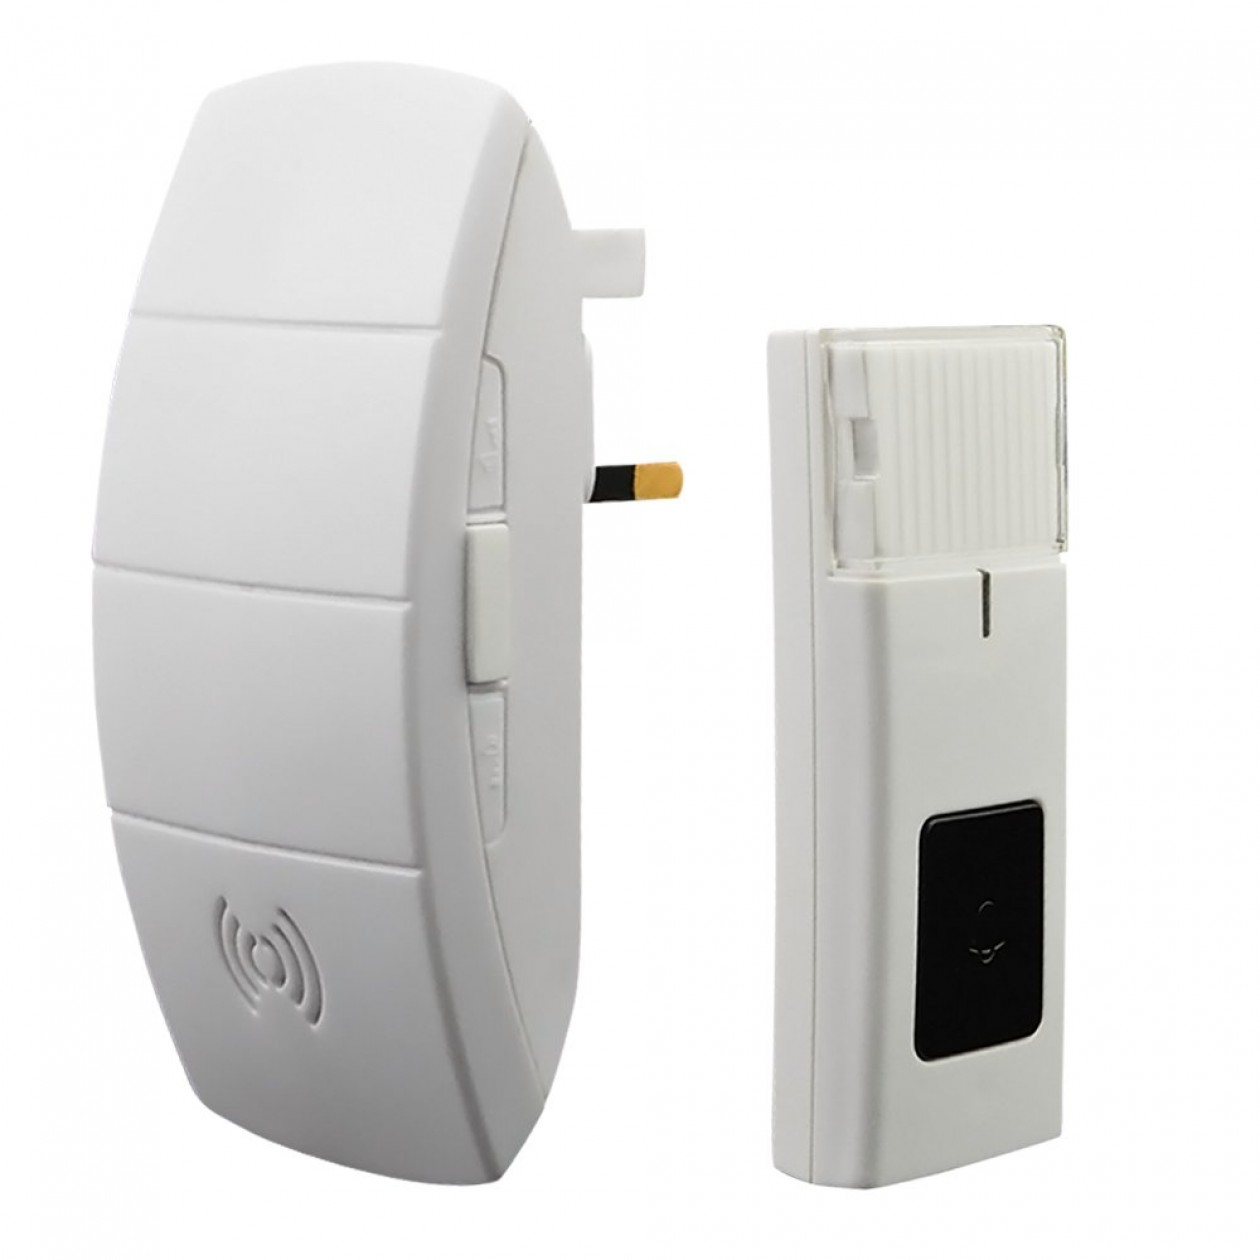 Rheme Wireless Portable Digital Door Bell Doorbell Chime with Mains Adapter - 100m Range - 32 Tunes (Oval Mains)